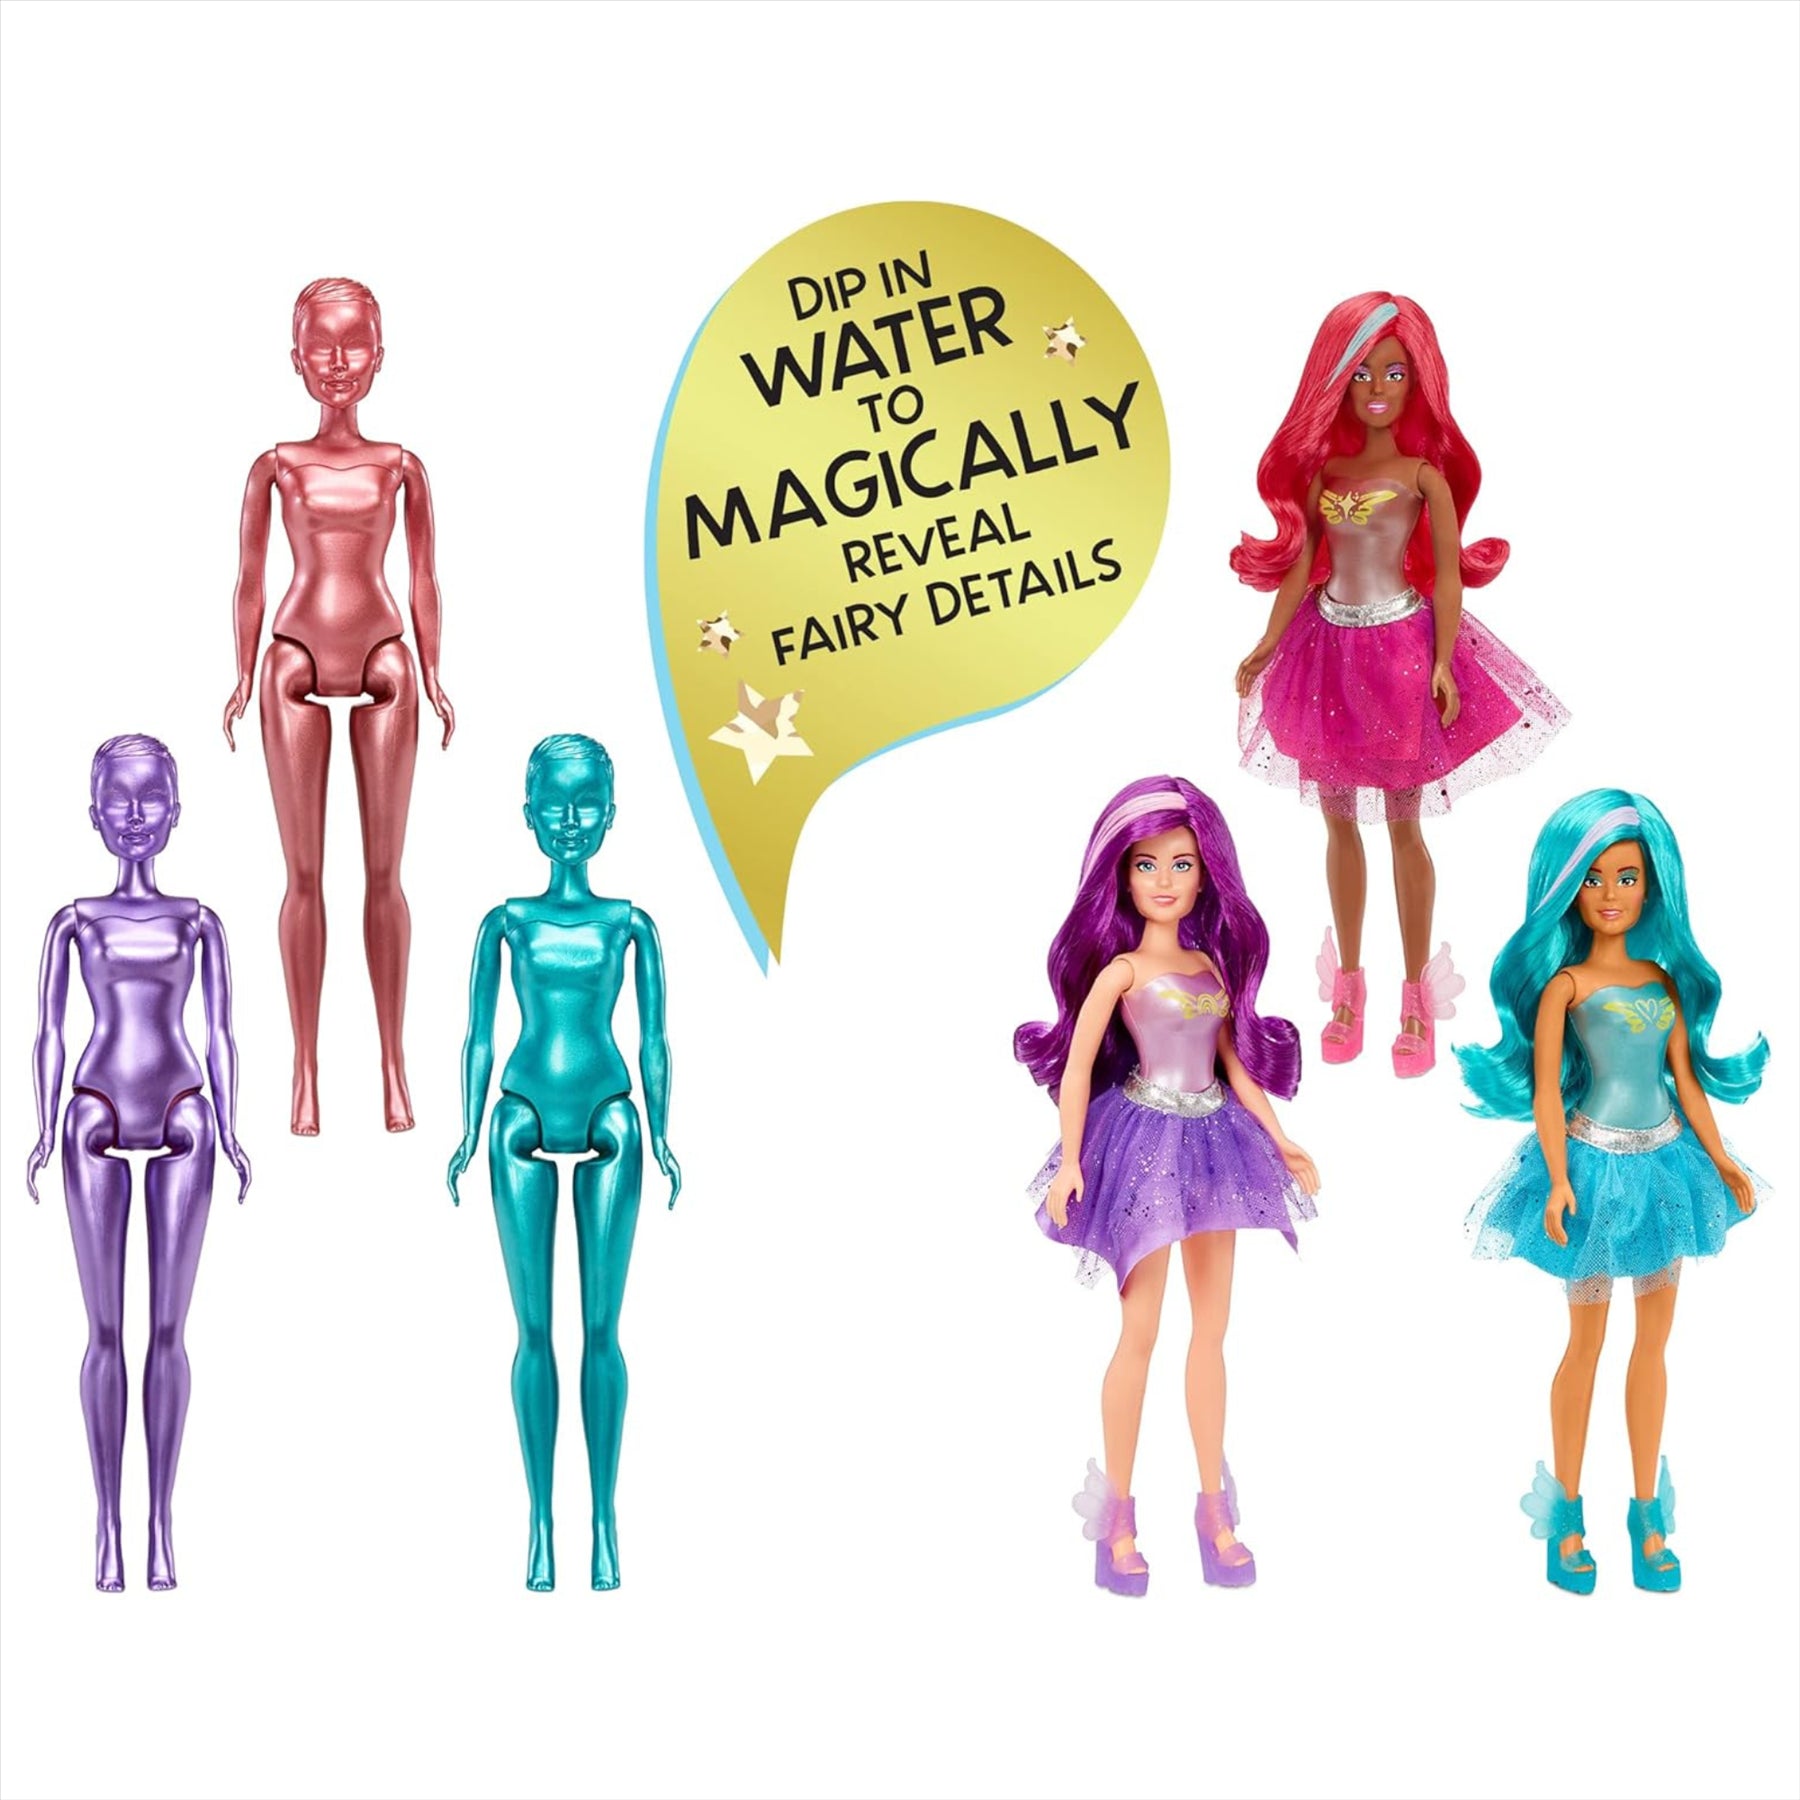 MGA Dream Ella Color Change Surprise Collectable Colour Changing Fairy Doll Toy - Includes Wig, Skirt, Boots, and More - Toptoys2u